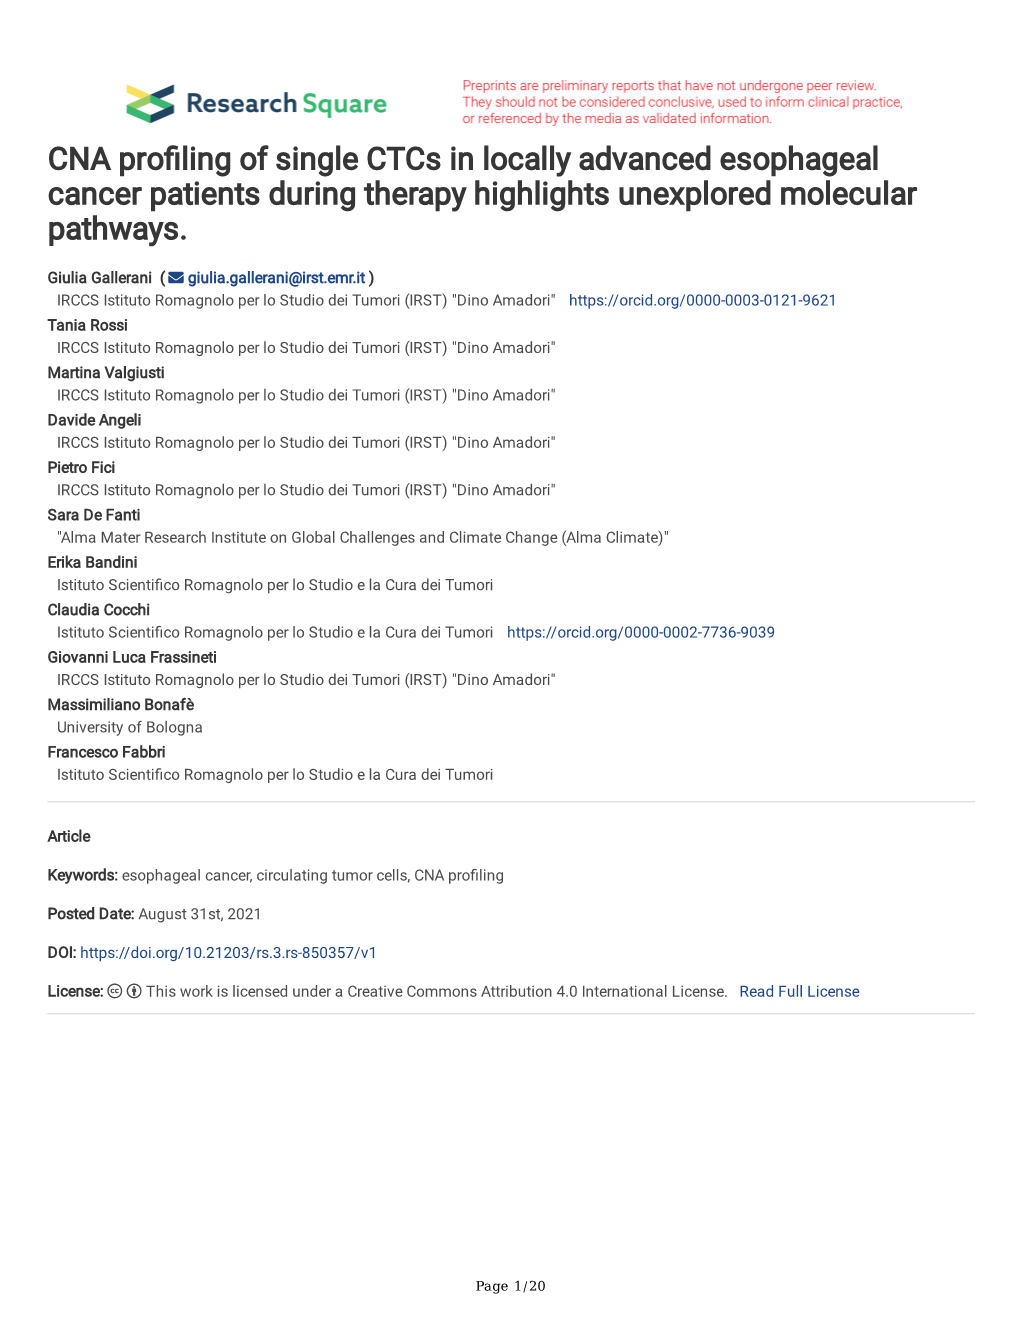 CNA Pro Ling of Single Ctcs in Locally Advanced Esophageal Cancer